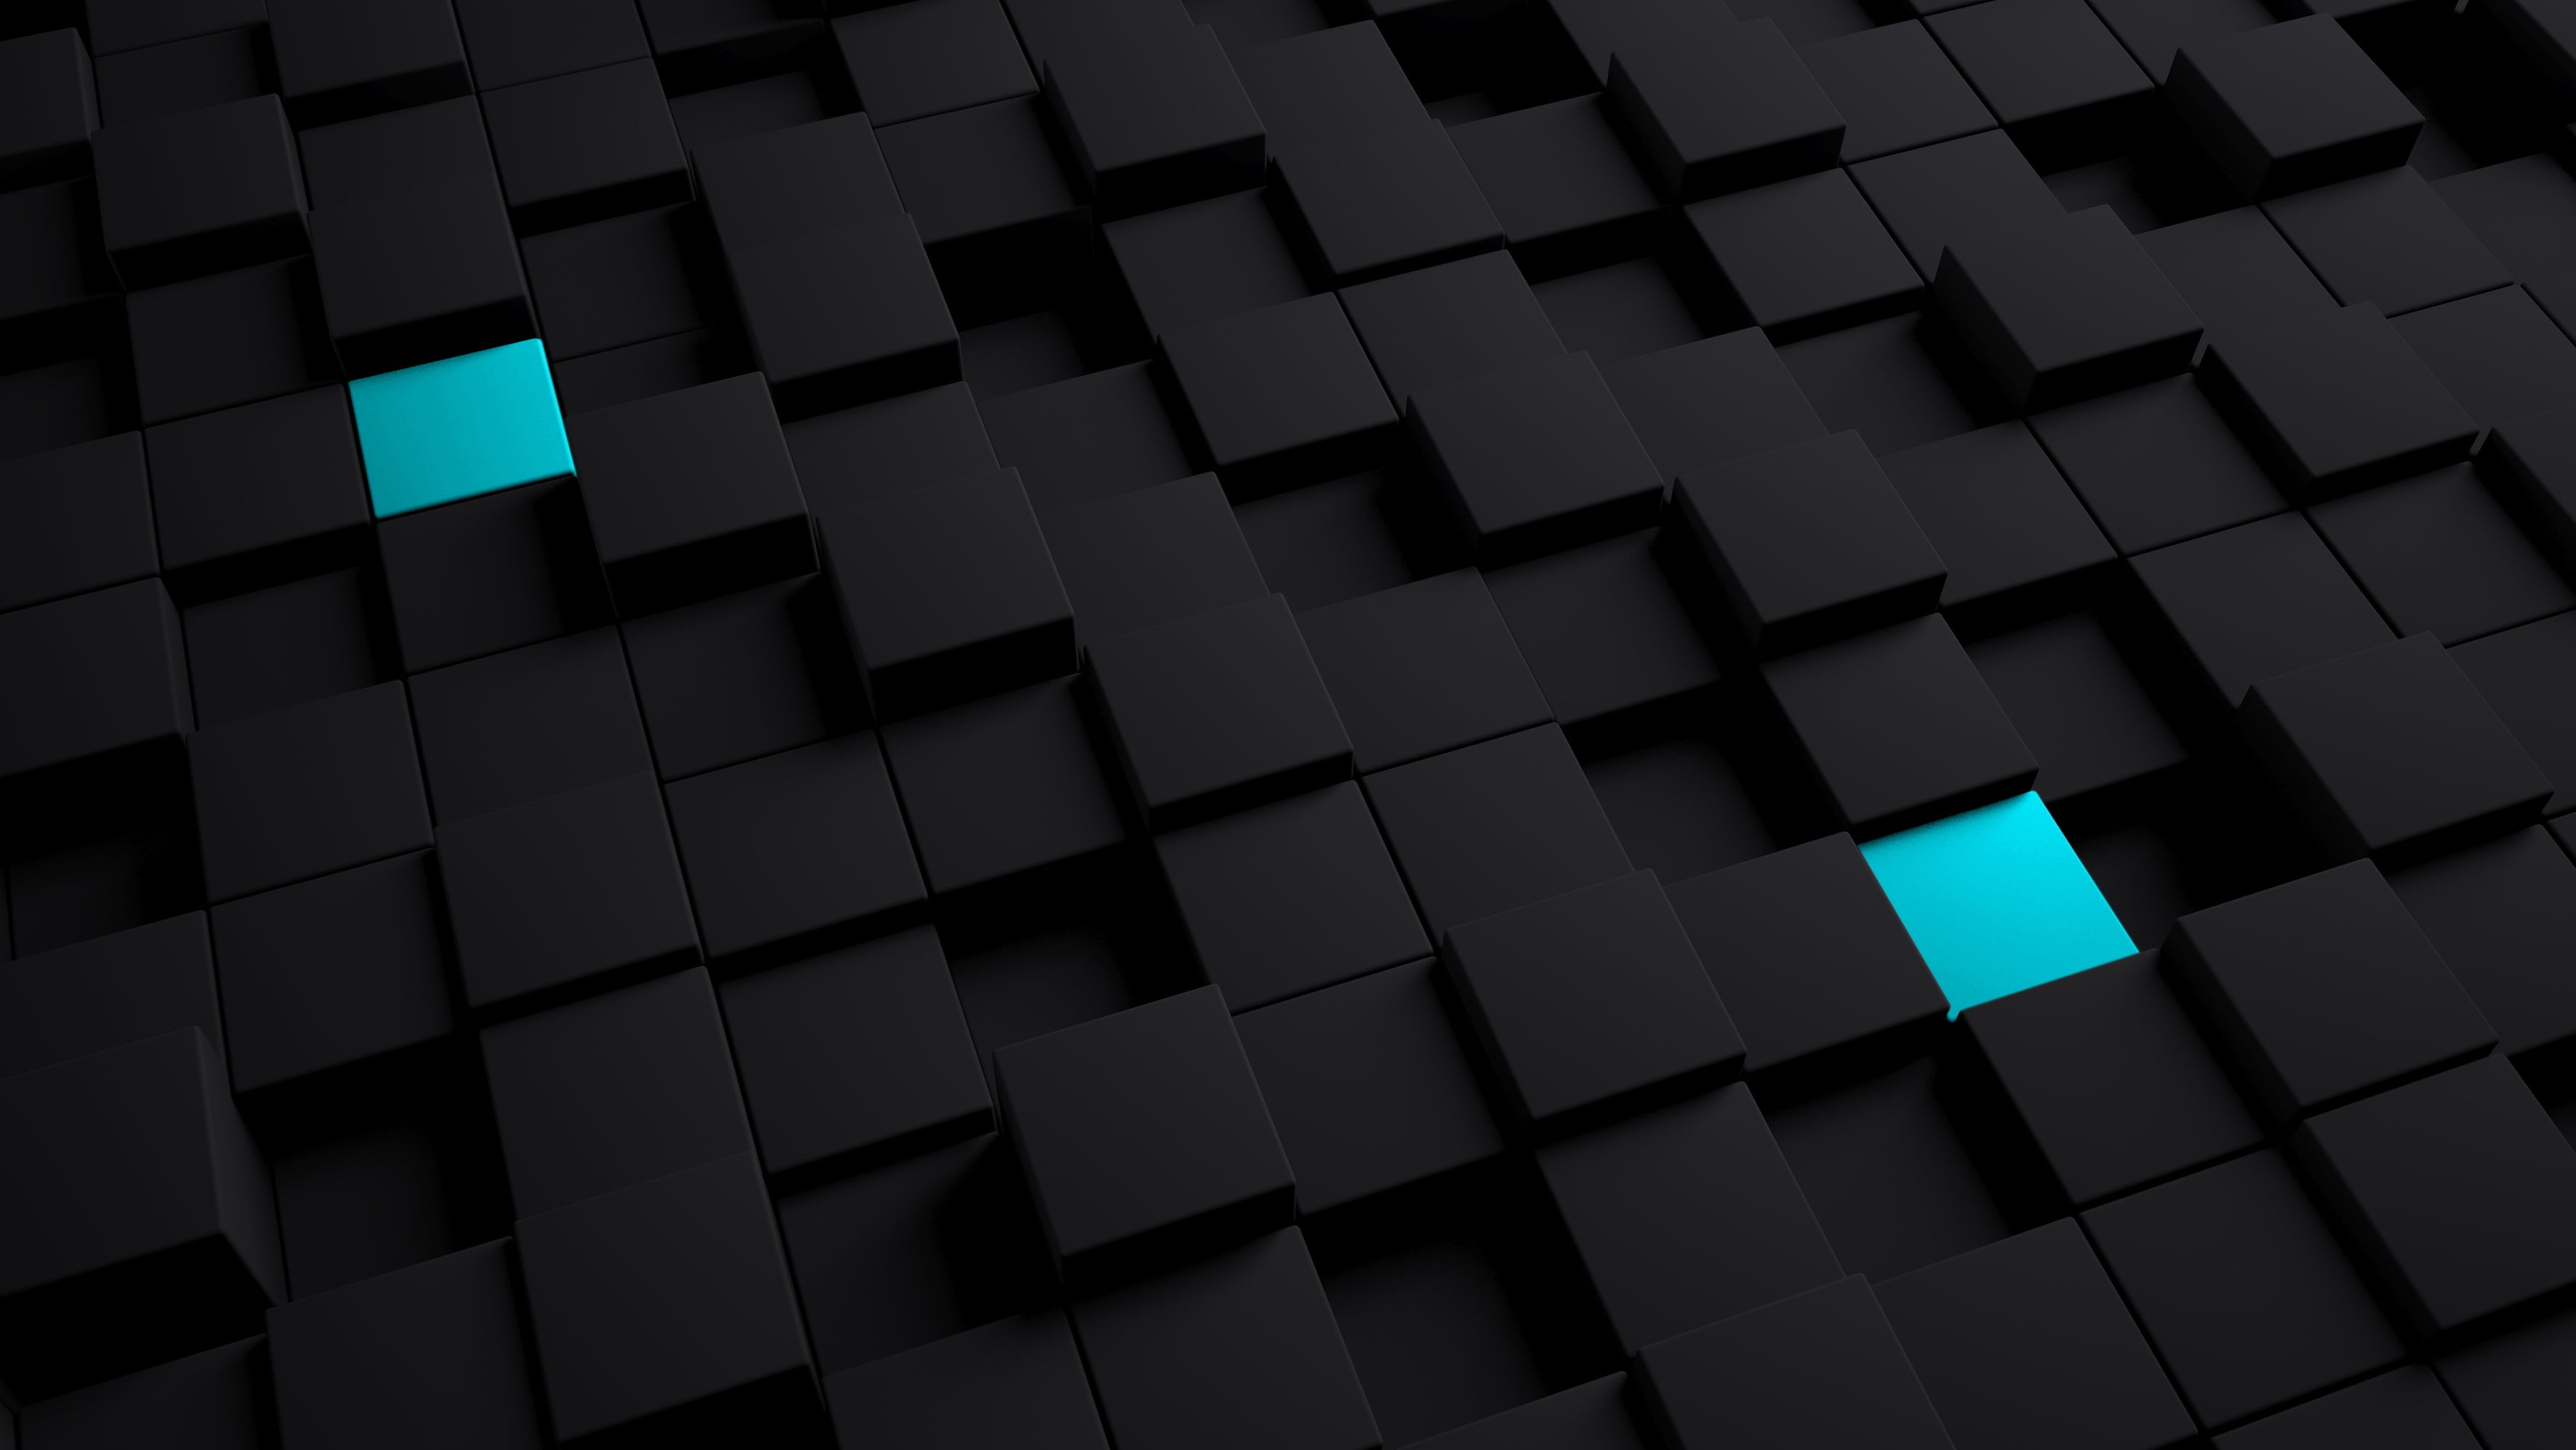 cubes, structure, black, blue, abstract, backgrounds, pattern